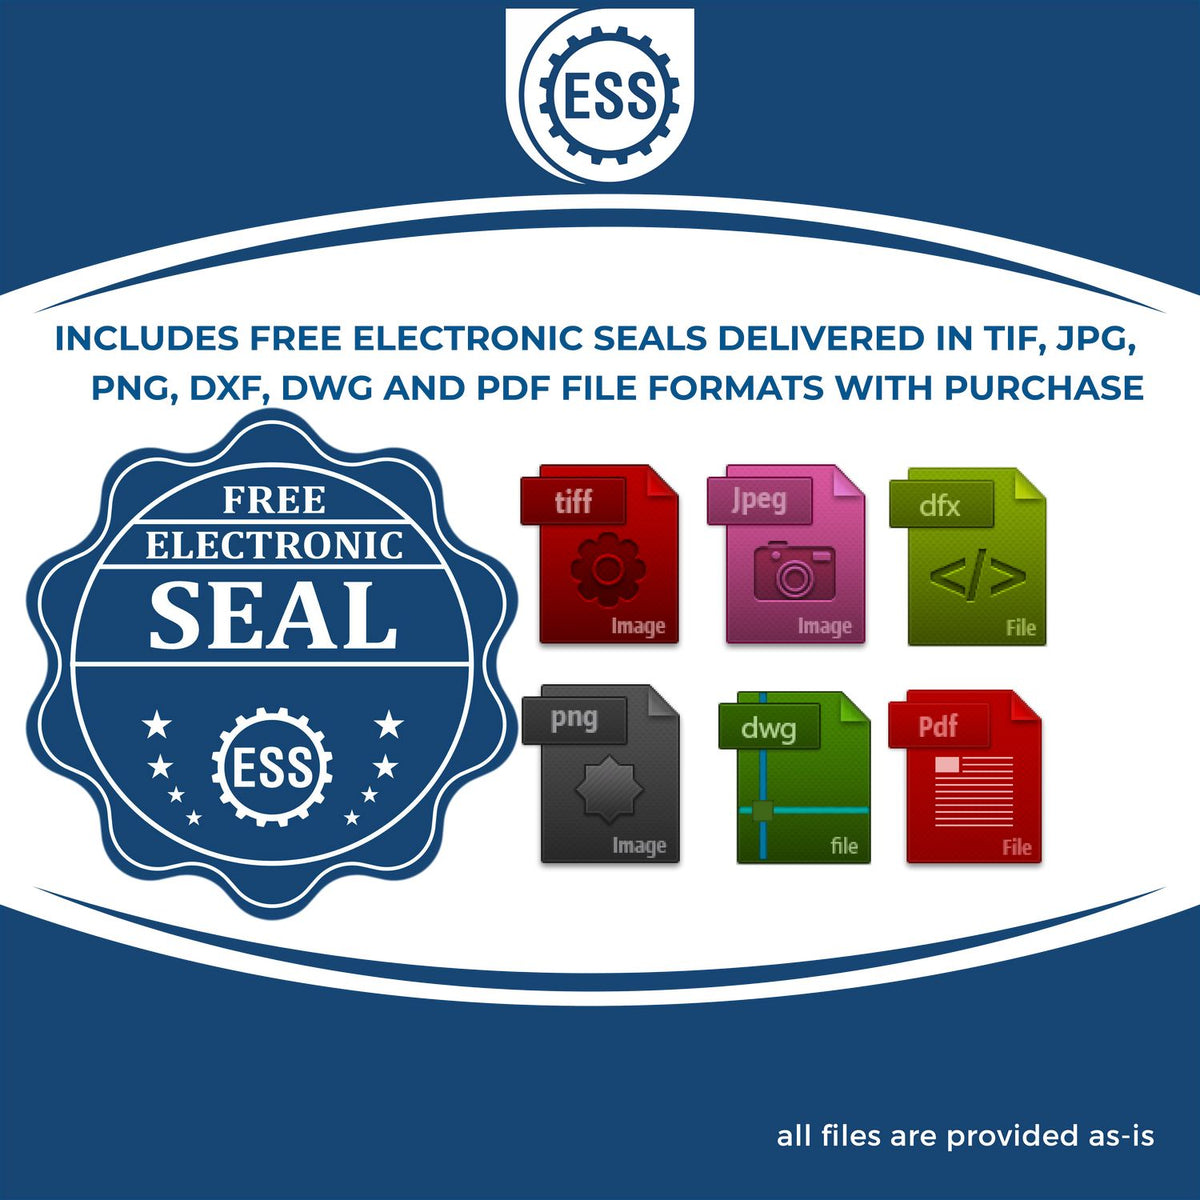 An infographic for the free electronic seal for the Guam Desk Architect Embossing Seal illustrating the different file type icons such as DXF, DWG, TIF, JPG and PNG.